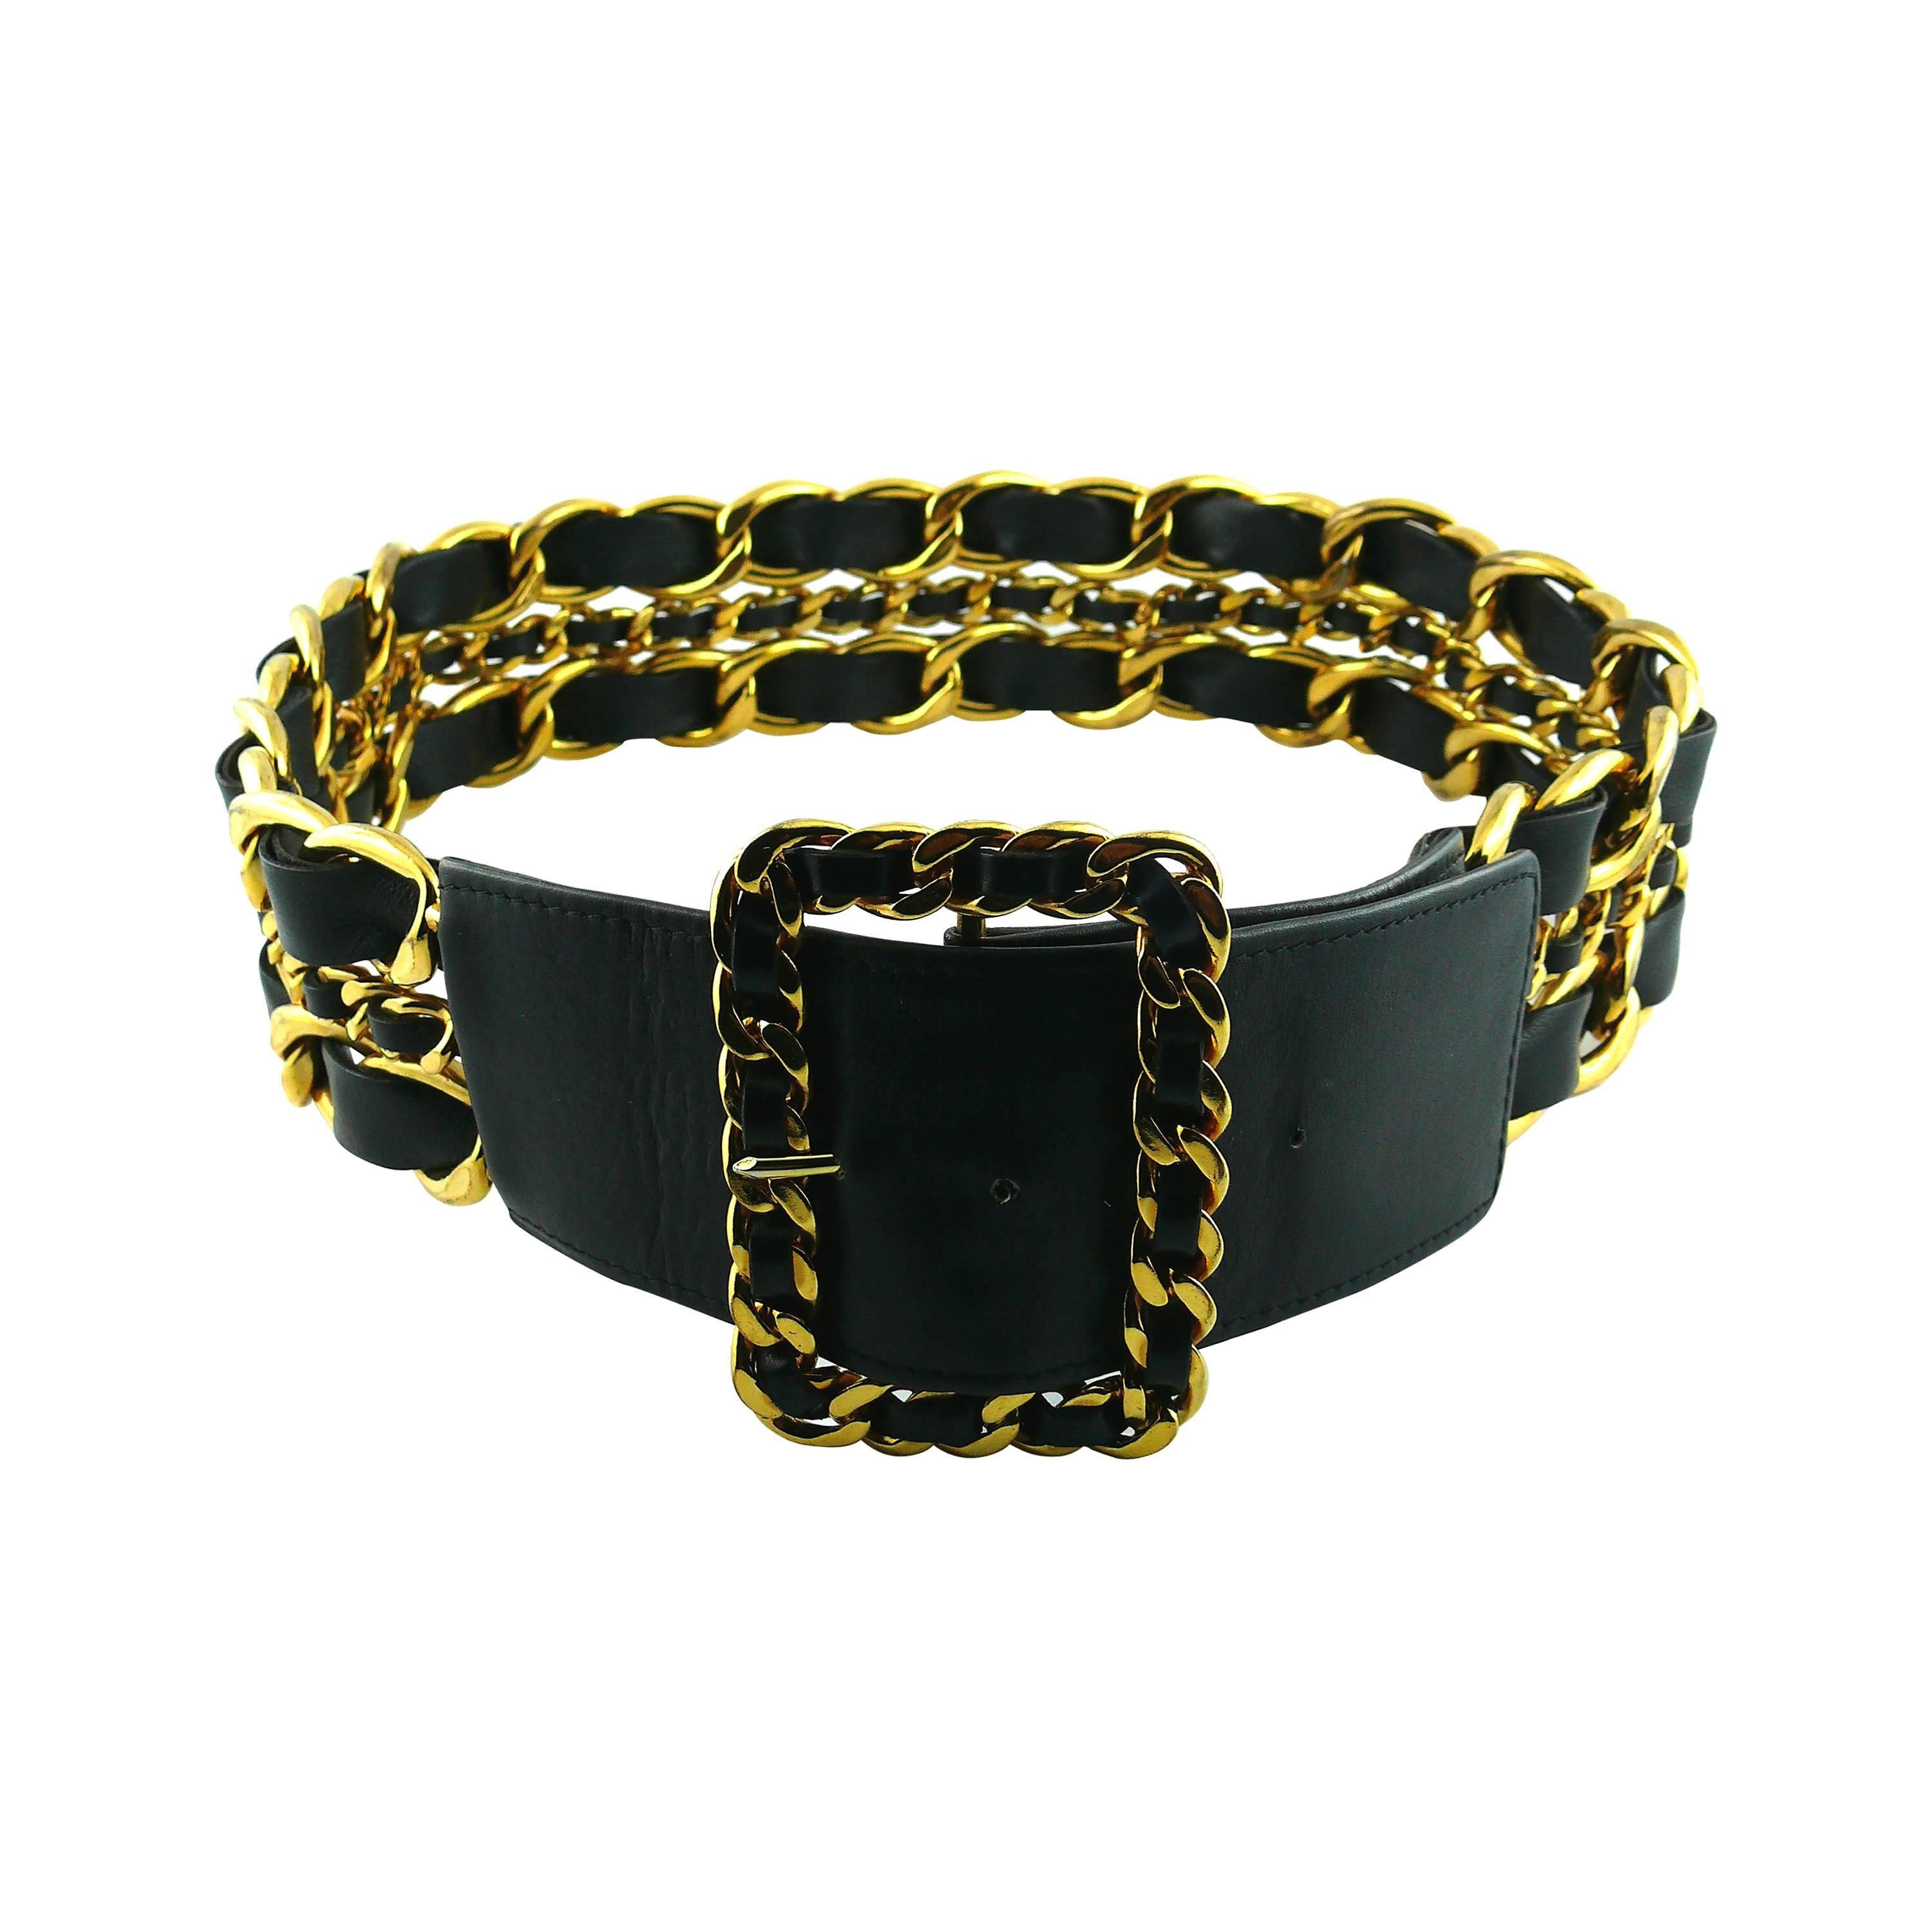 Chanel Vintage Large Iconic Chain and Woven Leather Belt